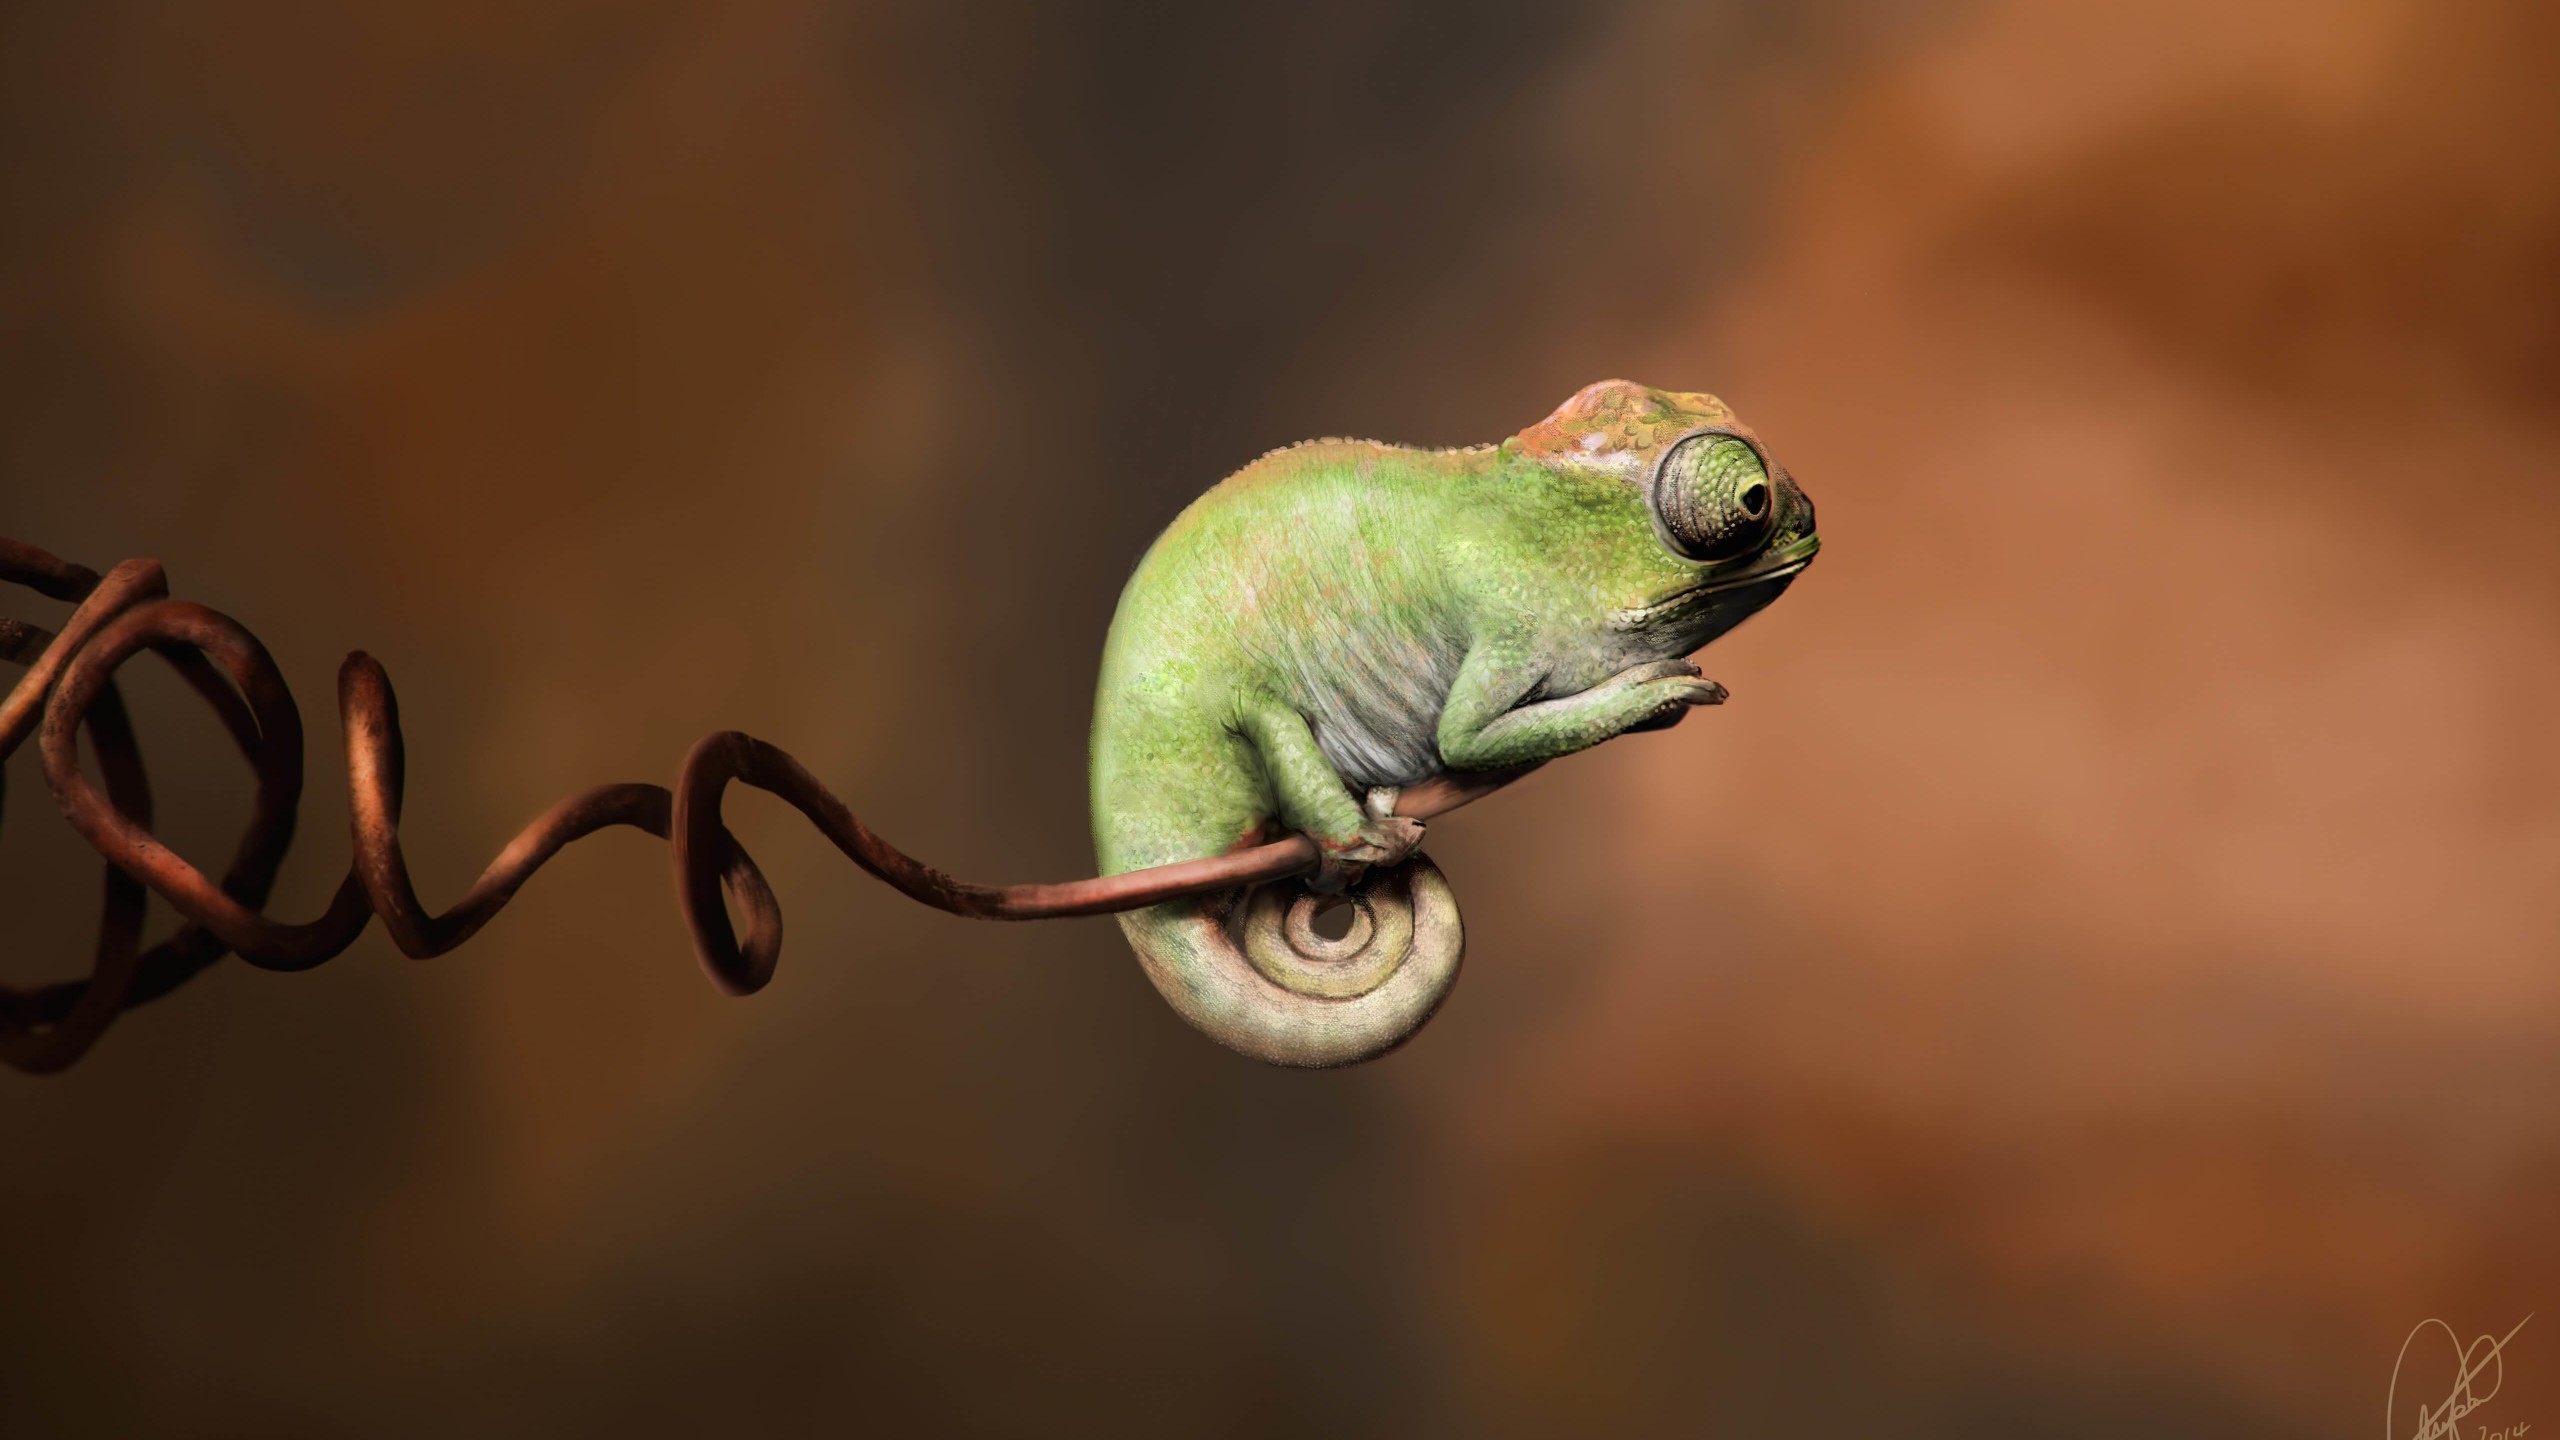 Baby Chameleon Perching On a Twisted Branch Wallpaper for Desktop 2560x1440